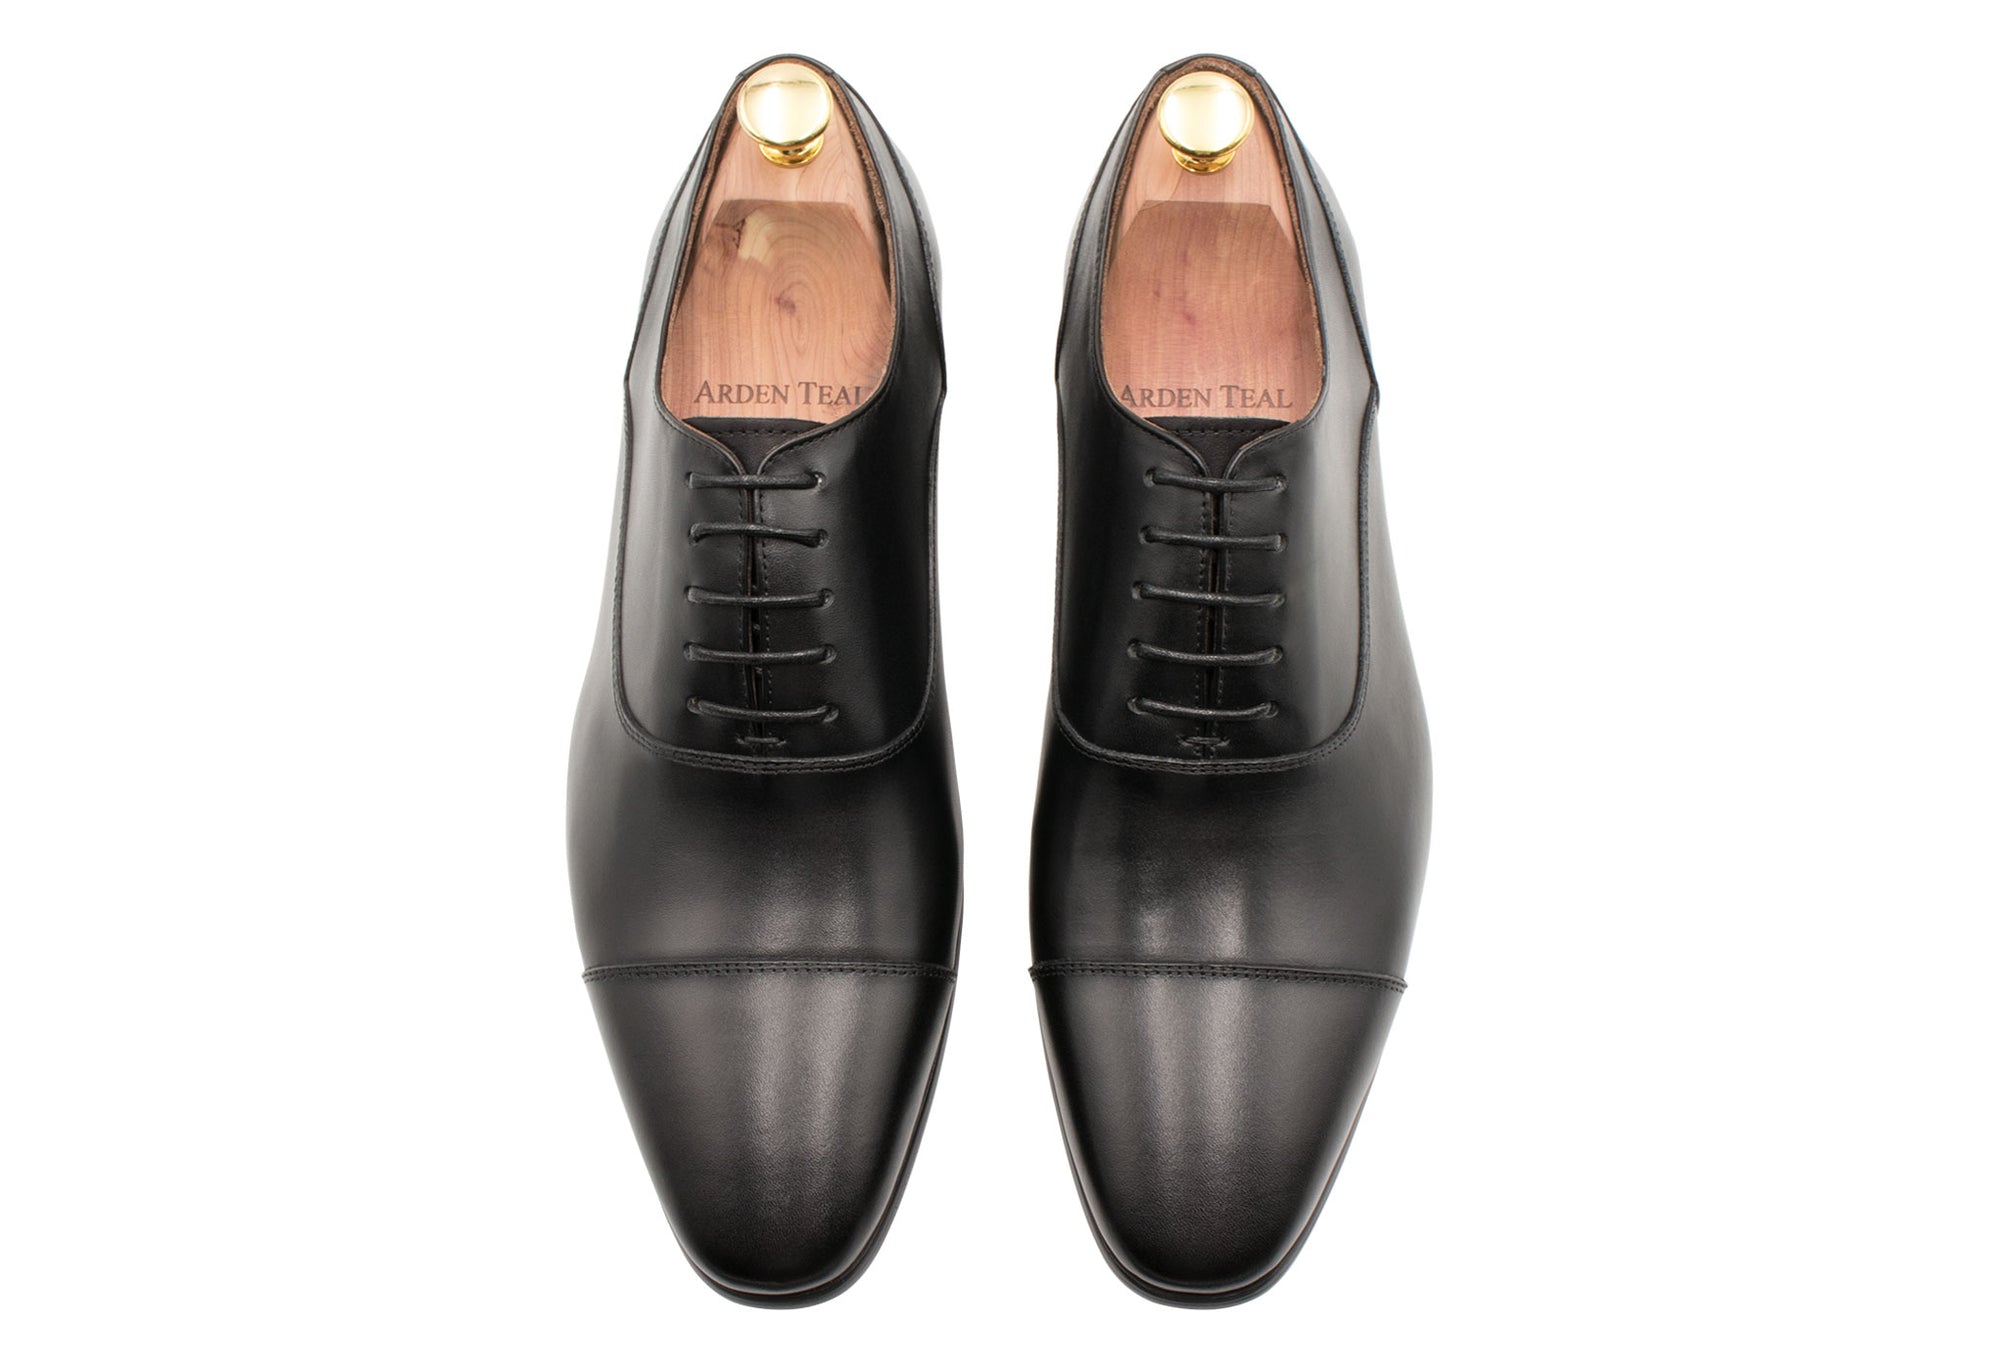 Calafate Straight Cap Black Oxford Leather Shoes